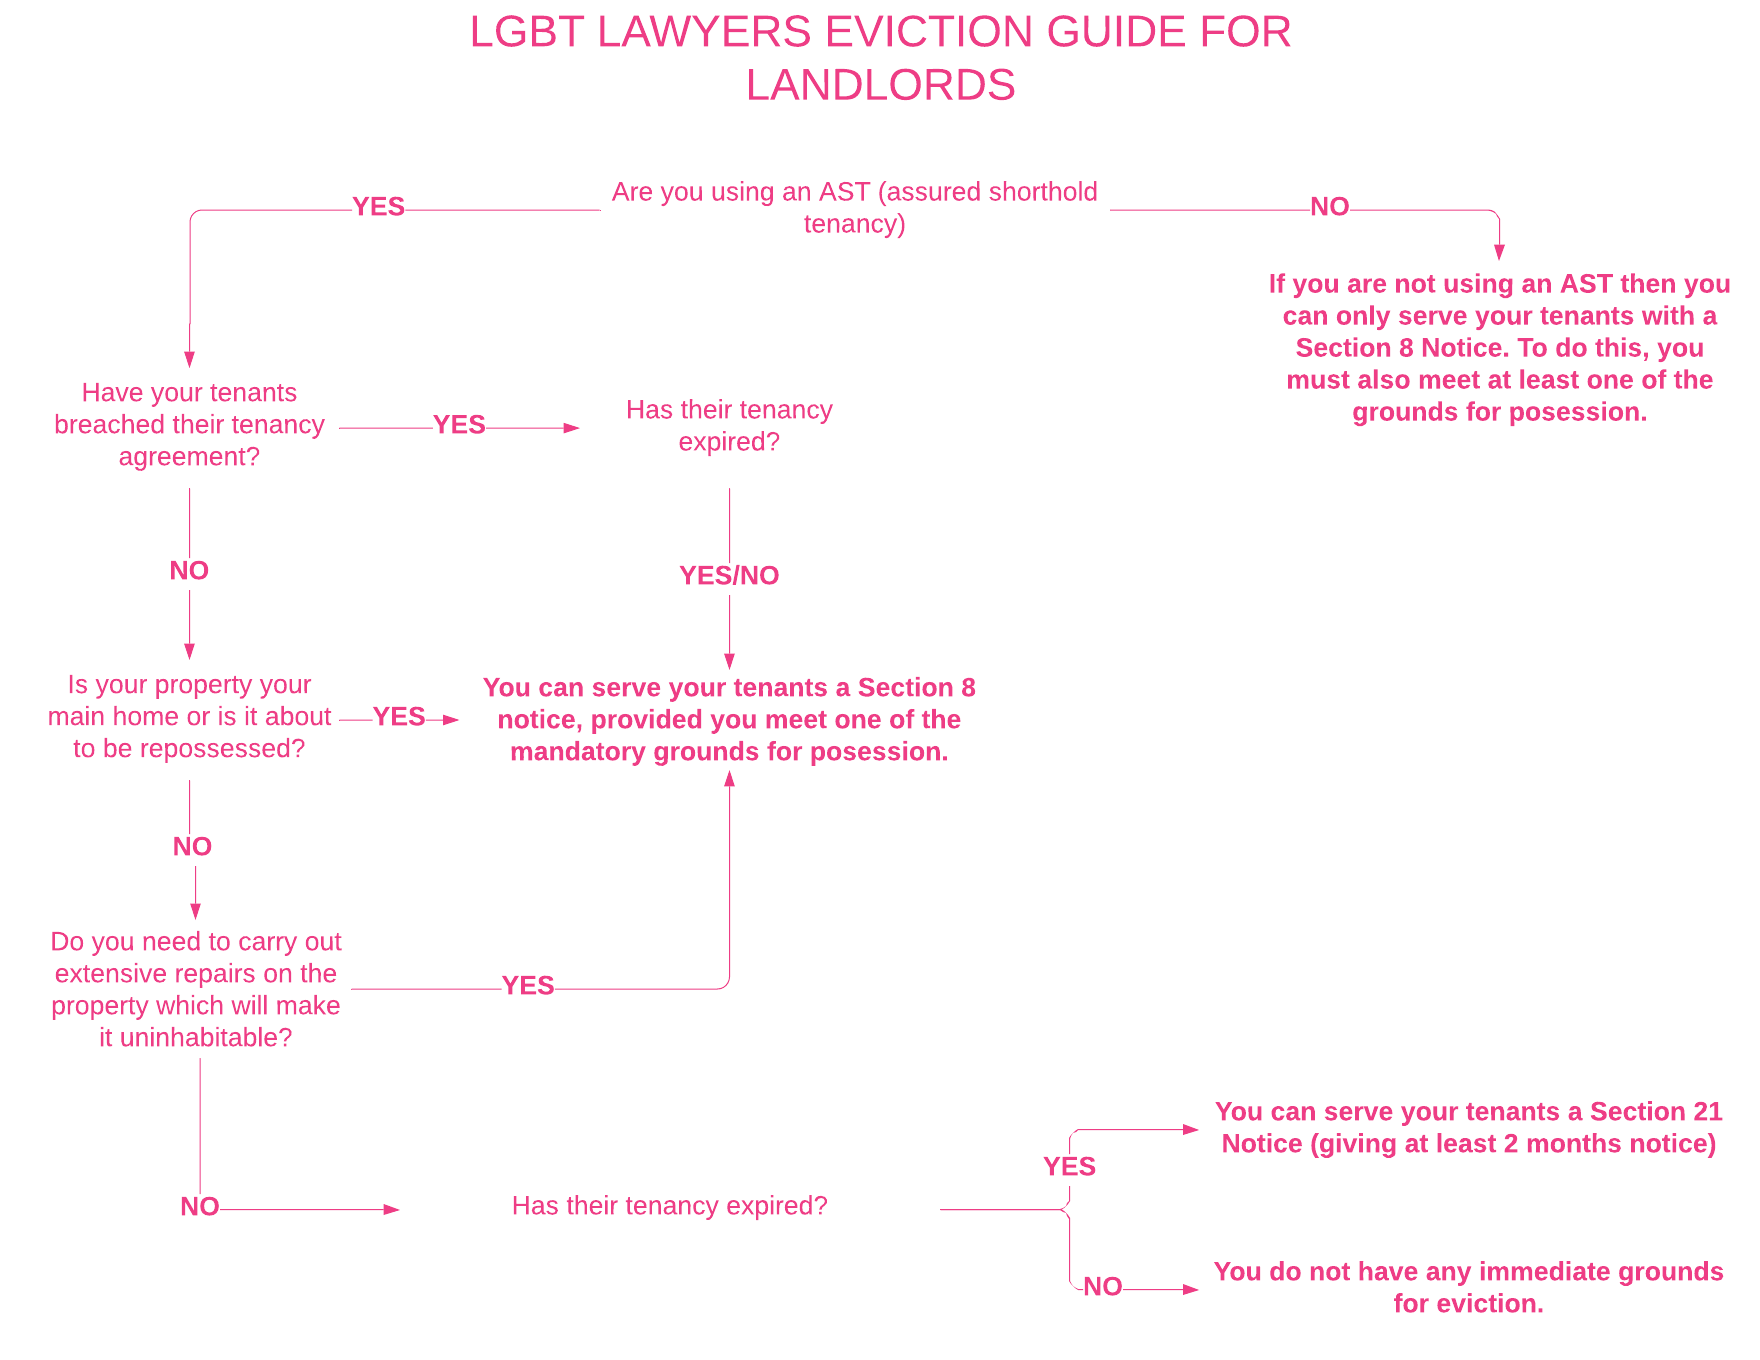 LGBT Lawyers Eviction Guide for Landlords